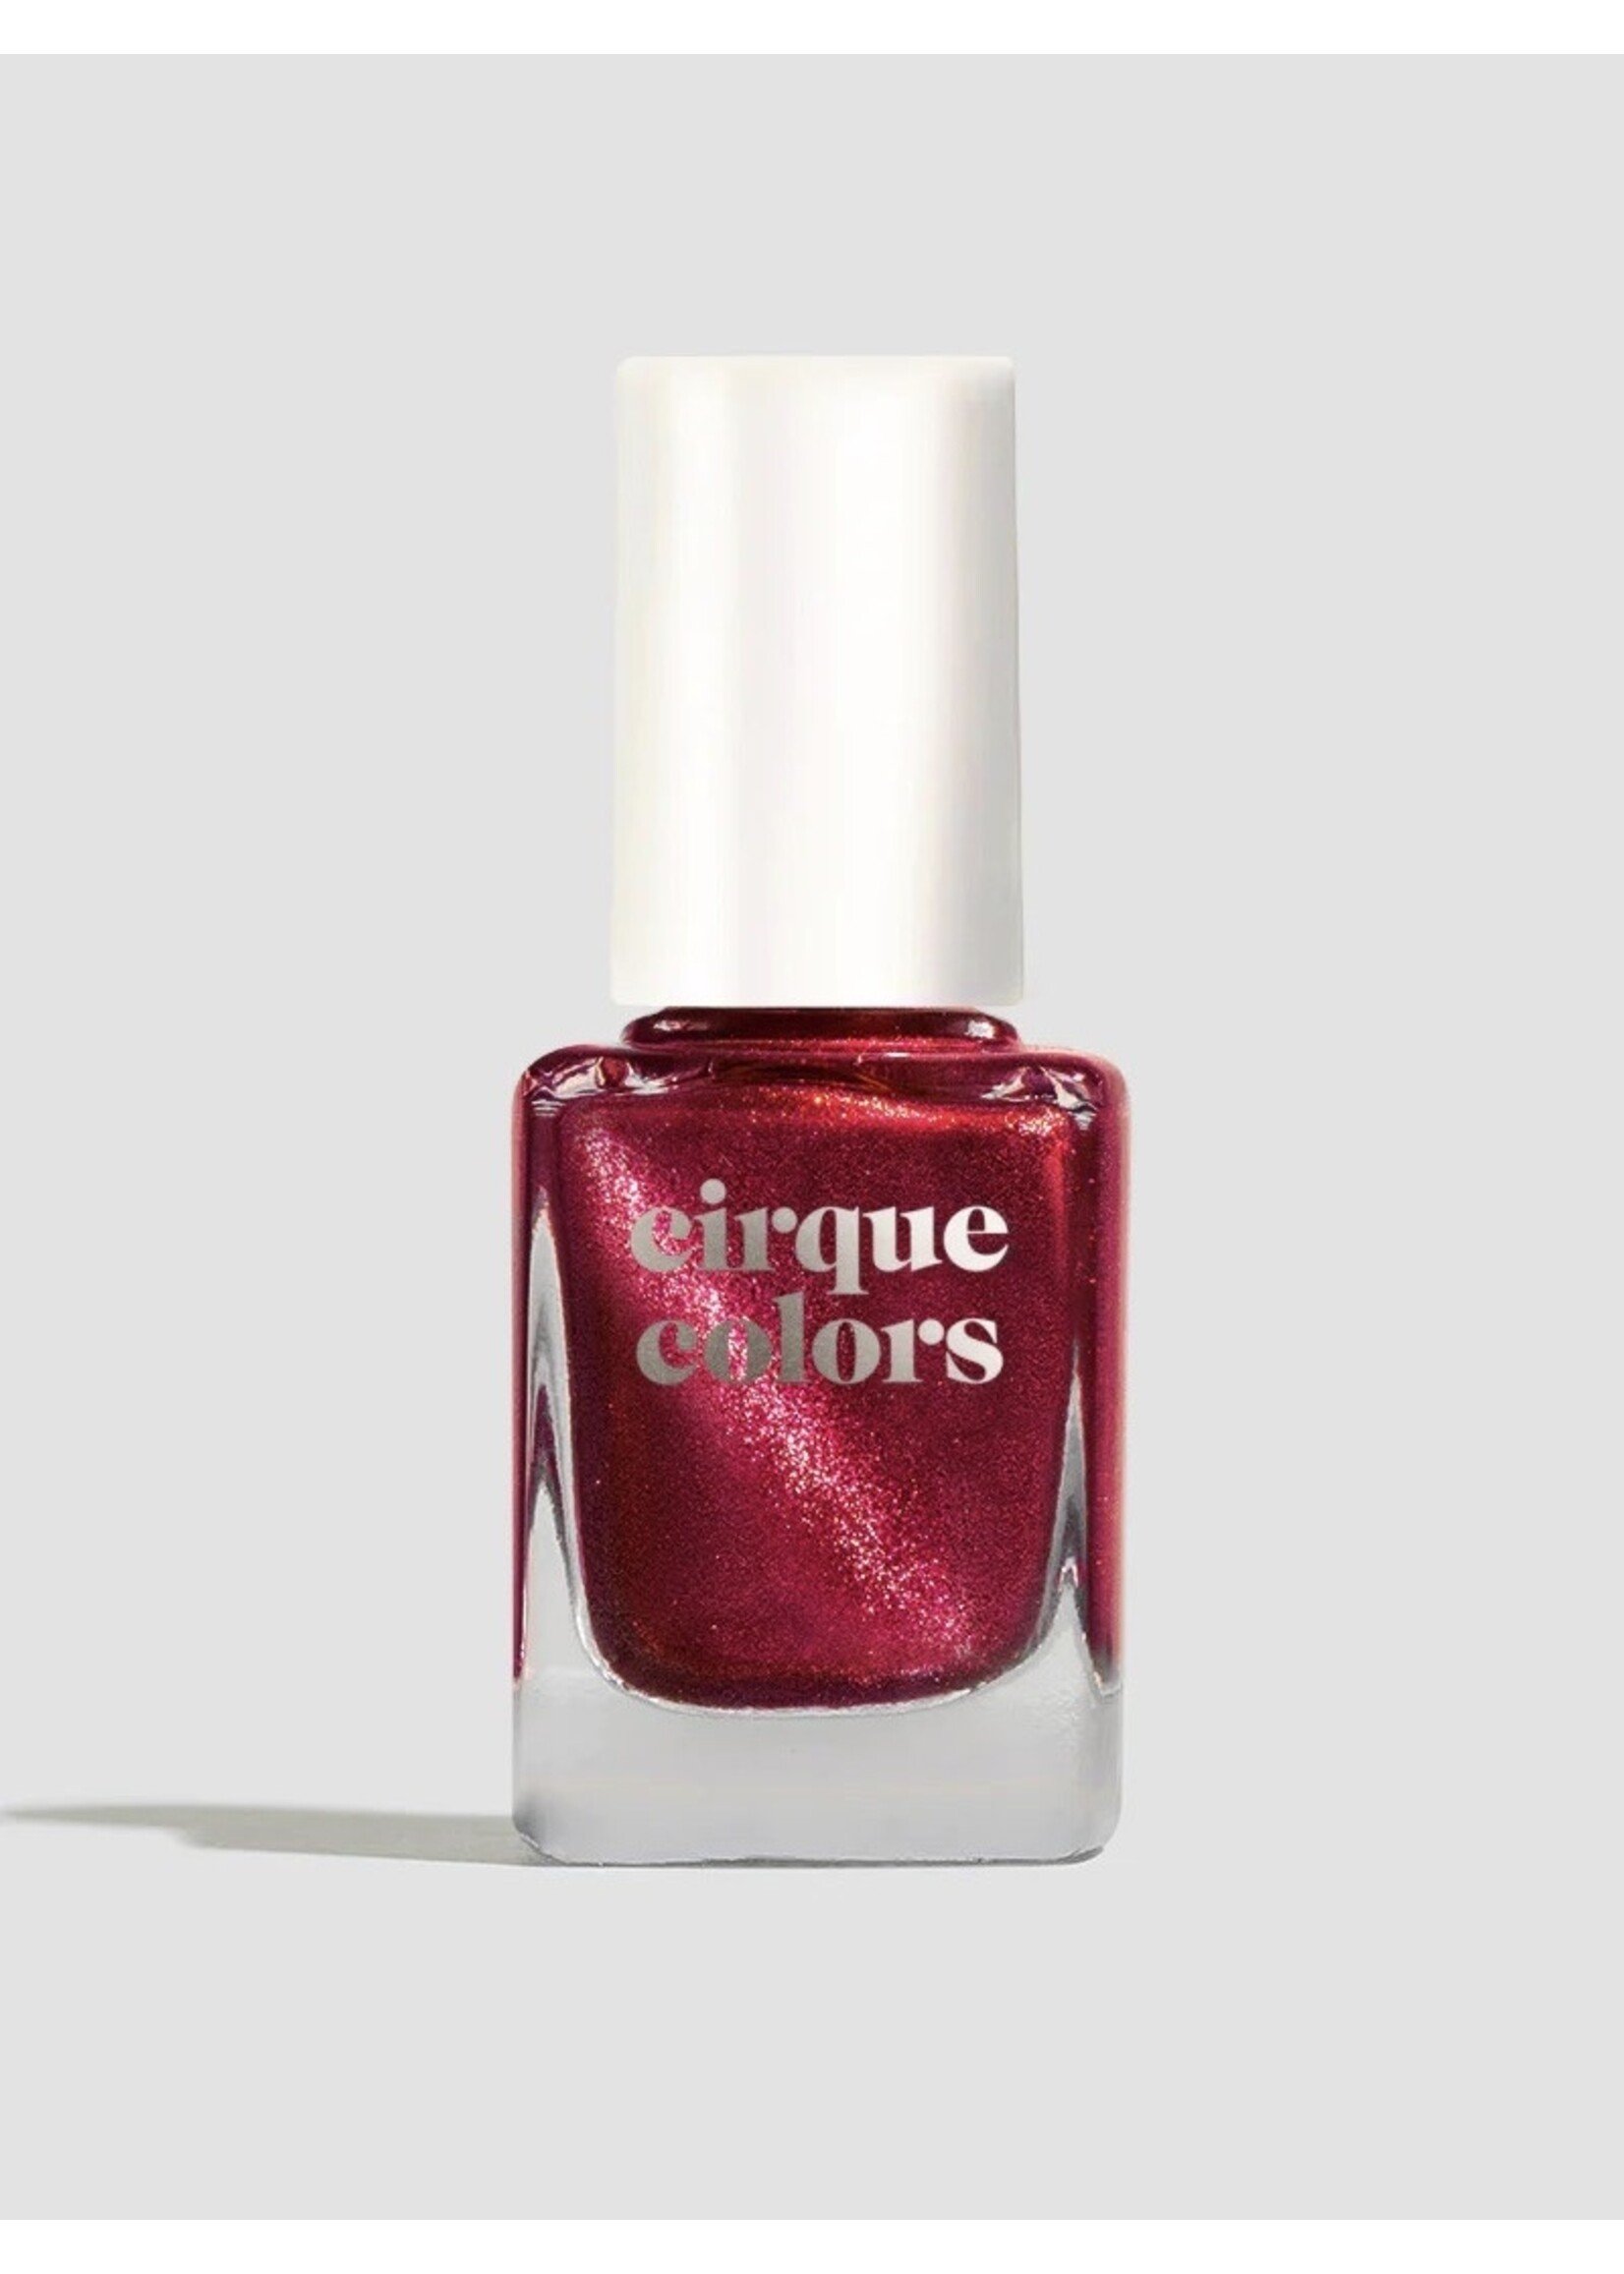 Cirque Colors Nail polishes "Heavenly Bodies" by Cirque Colors